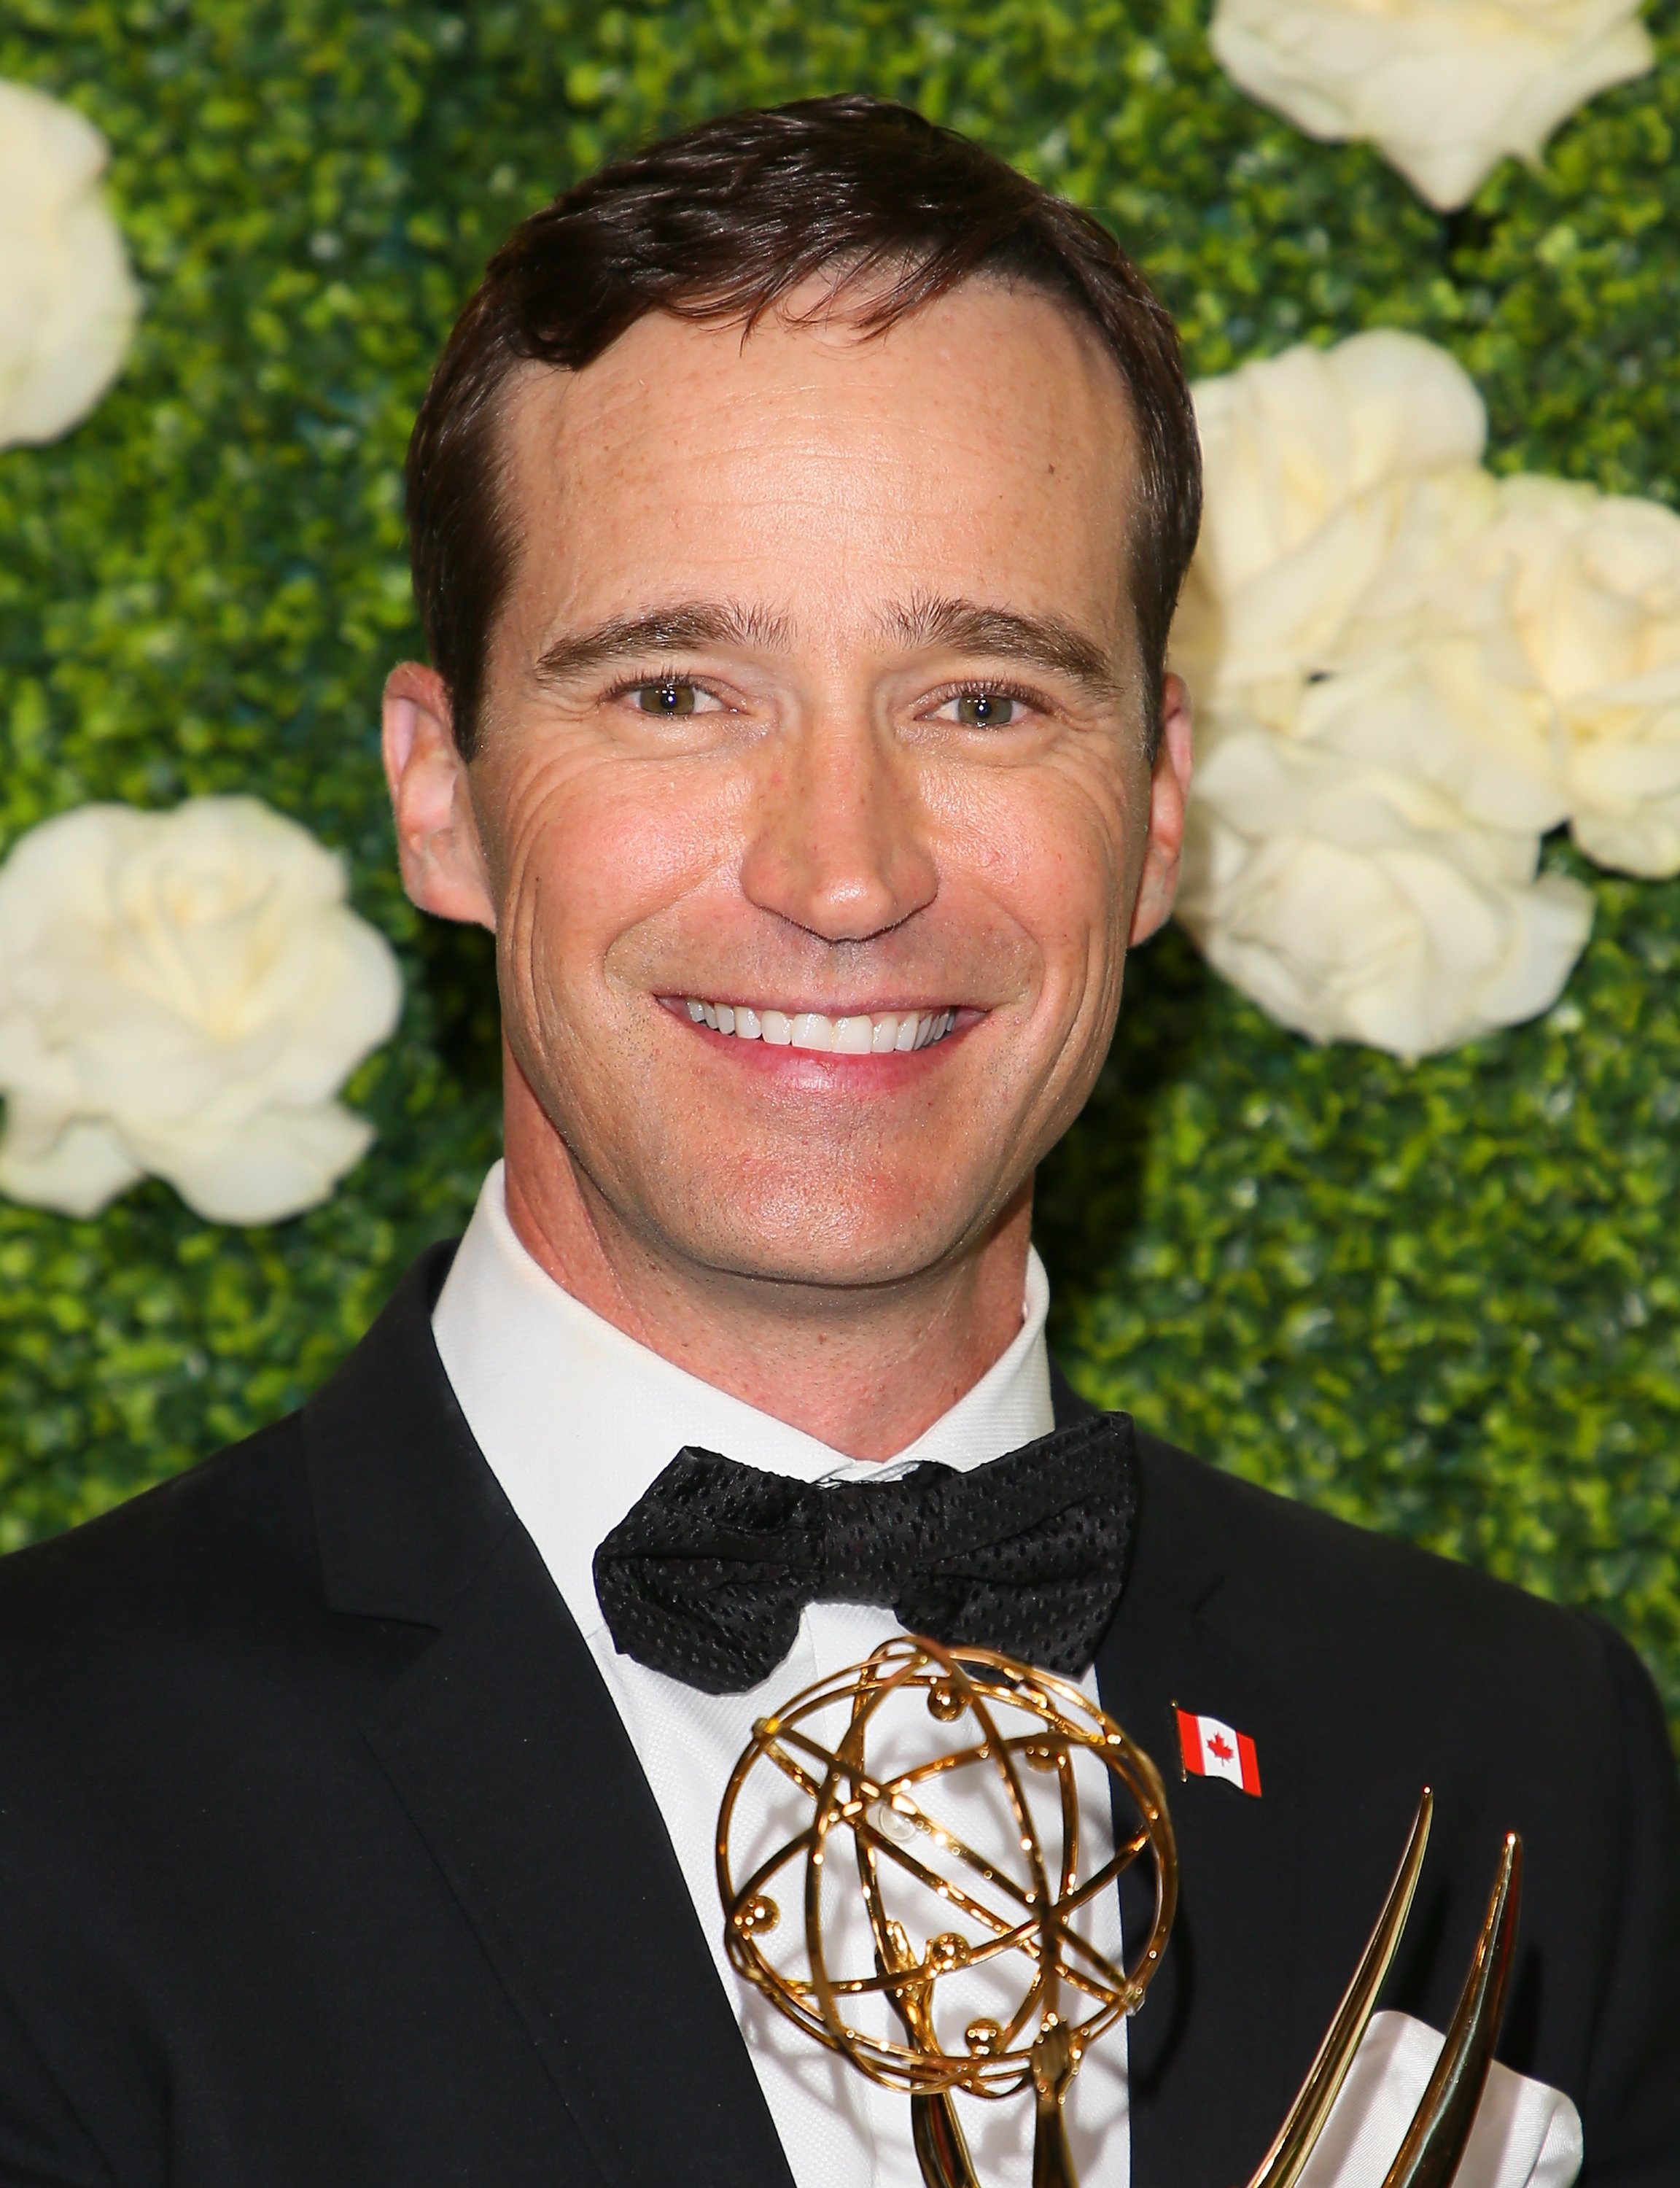 Mike Richards at the CBS Daytime Emmy After Party in Pasadena, California | Photo: JB Lacroix/WireImage via Getty Images